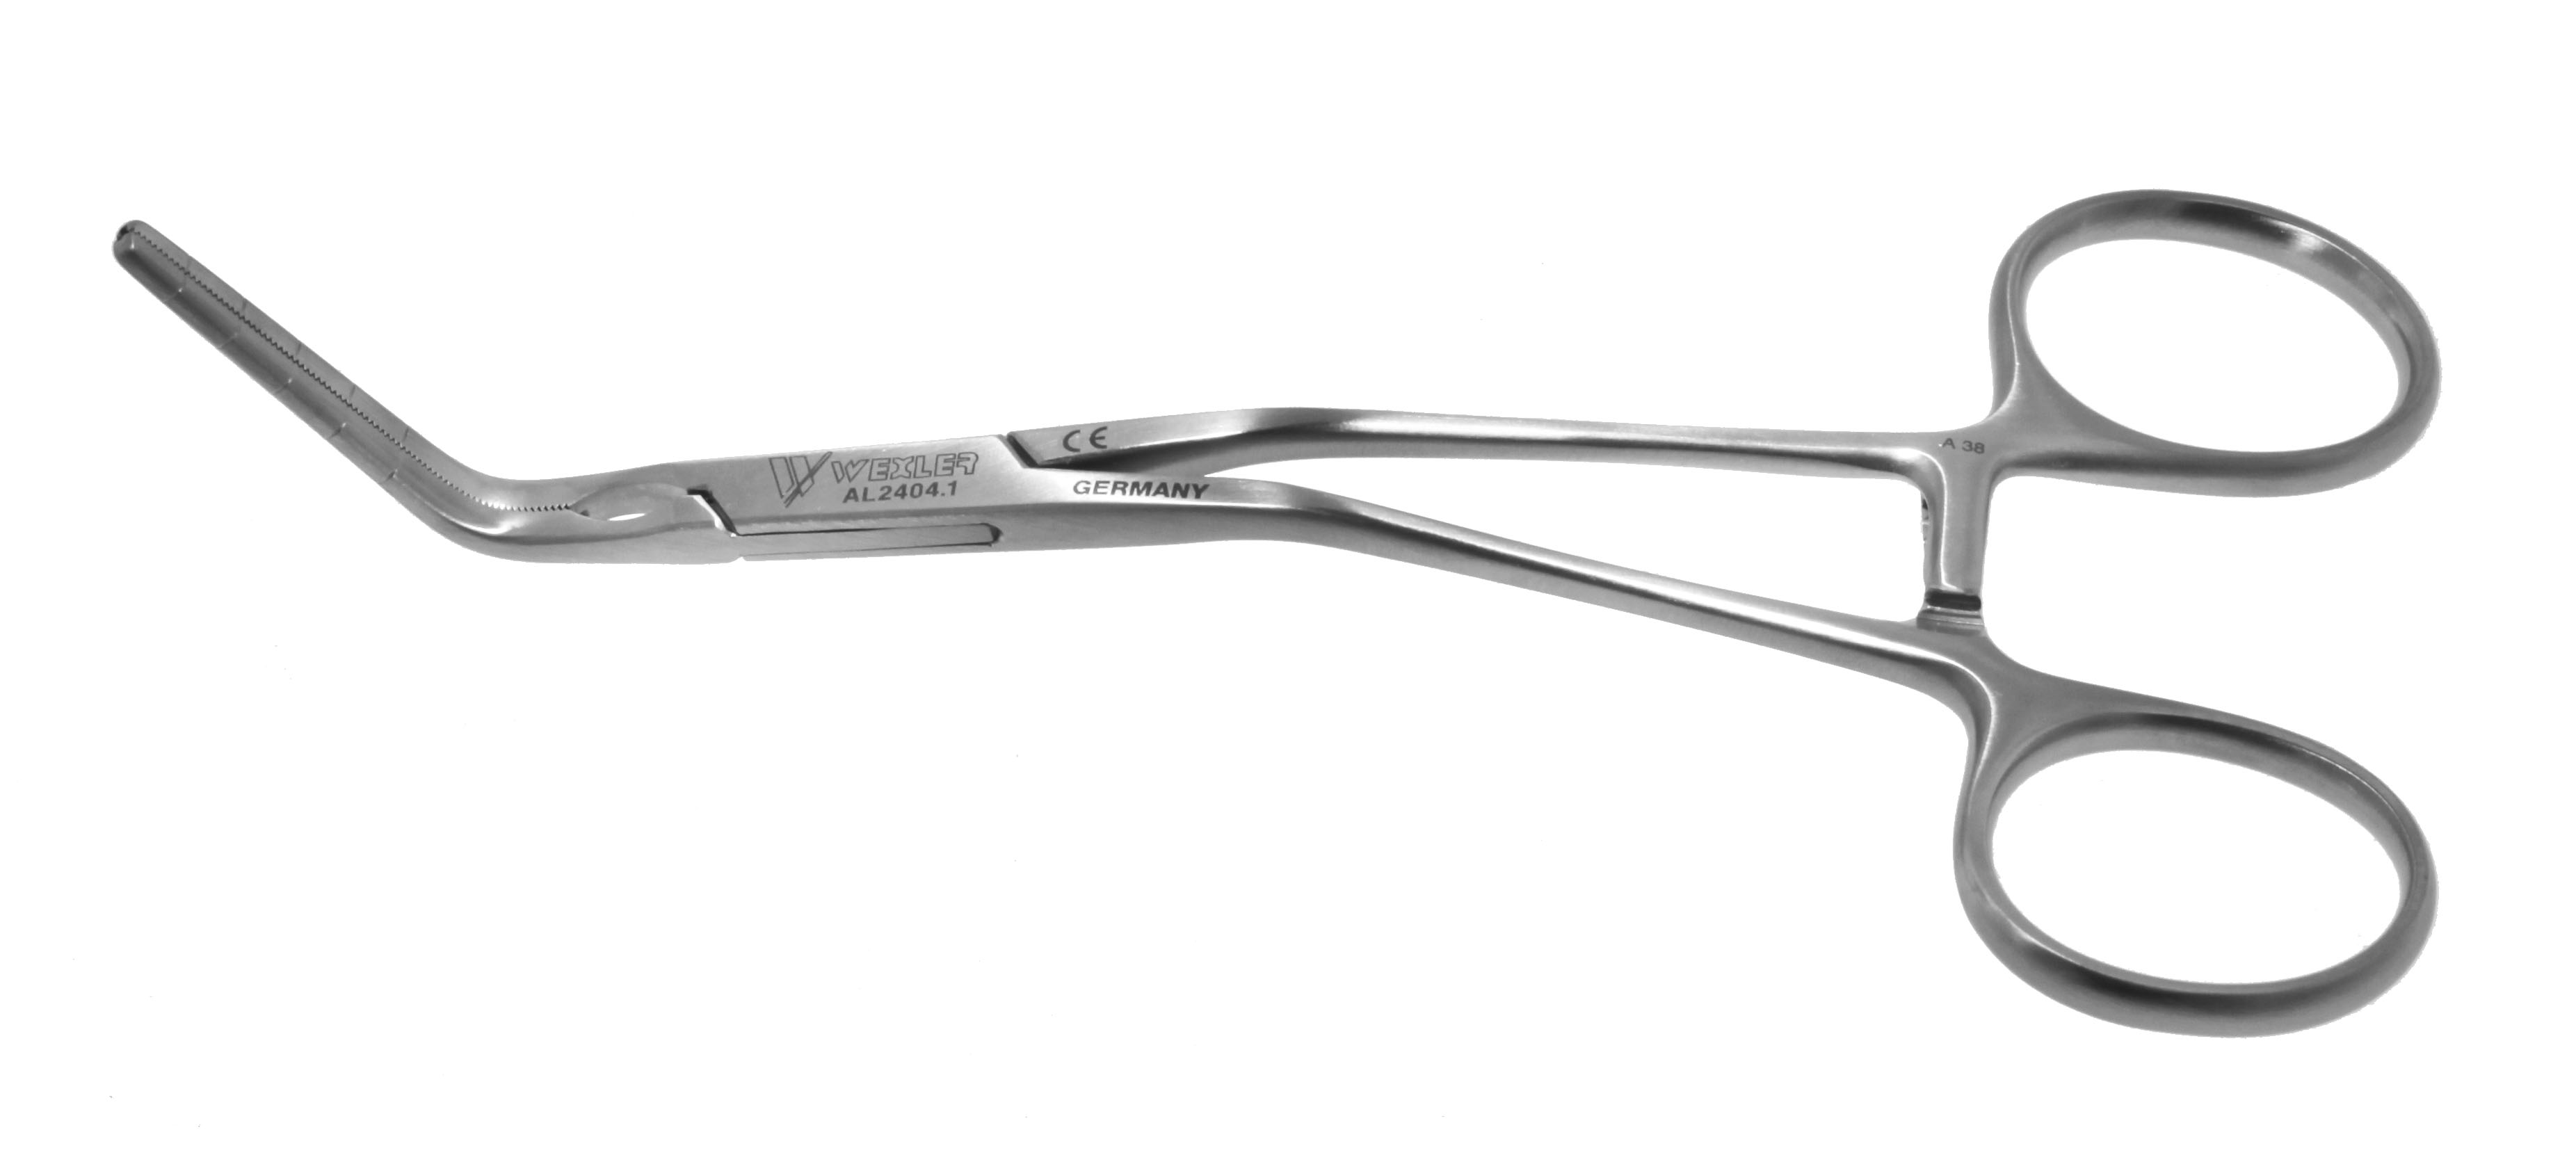 Wexler Multi-Purpose Clamp - Angled 30mm long Cooley Atraumatic jaws